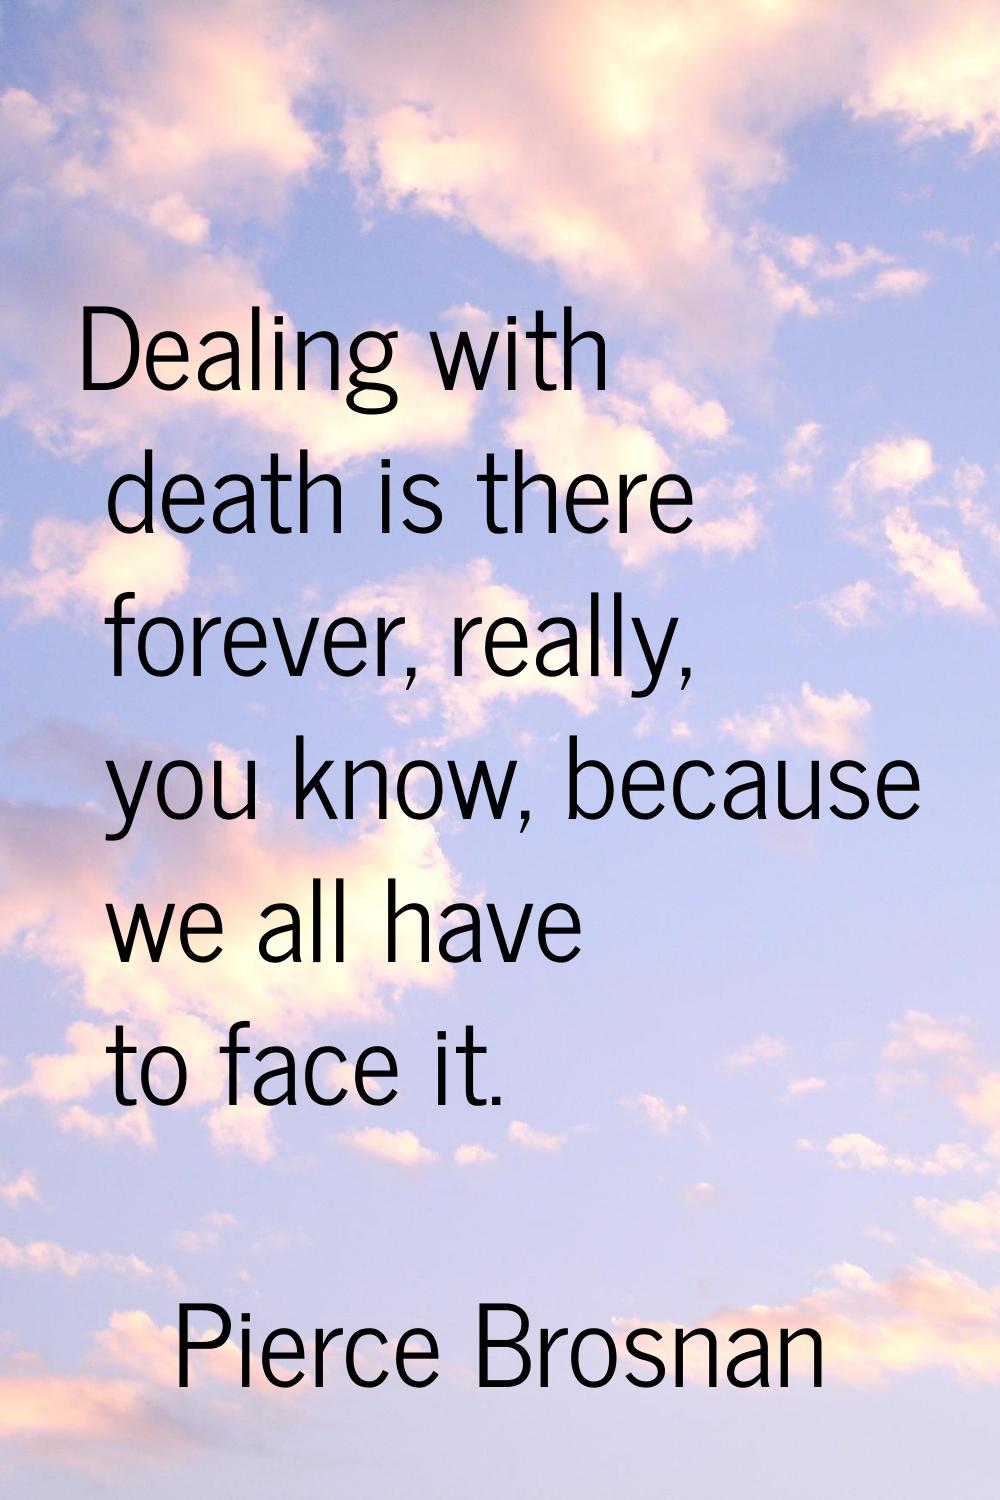 Dealing with death is there forever, really, you know, because we all have to face it.